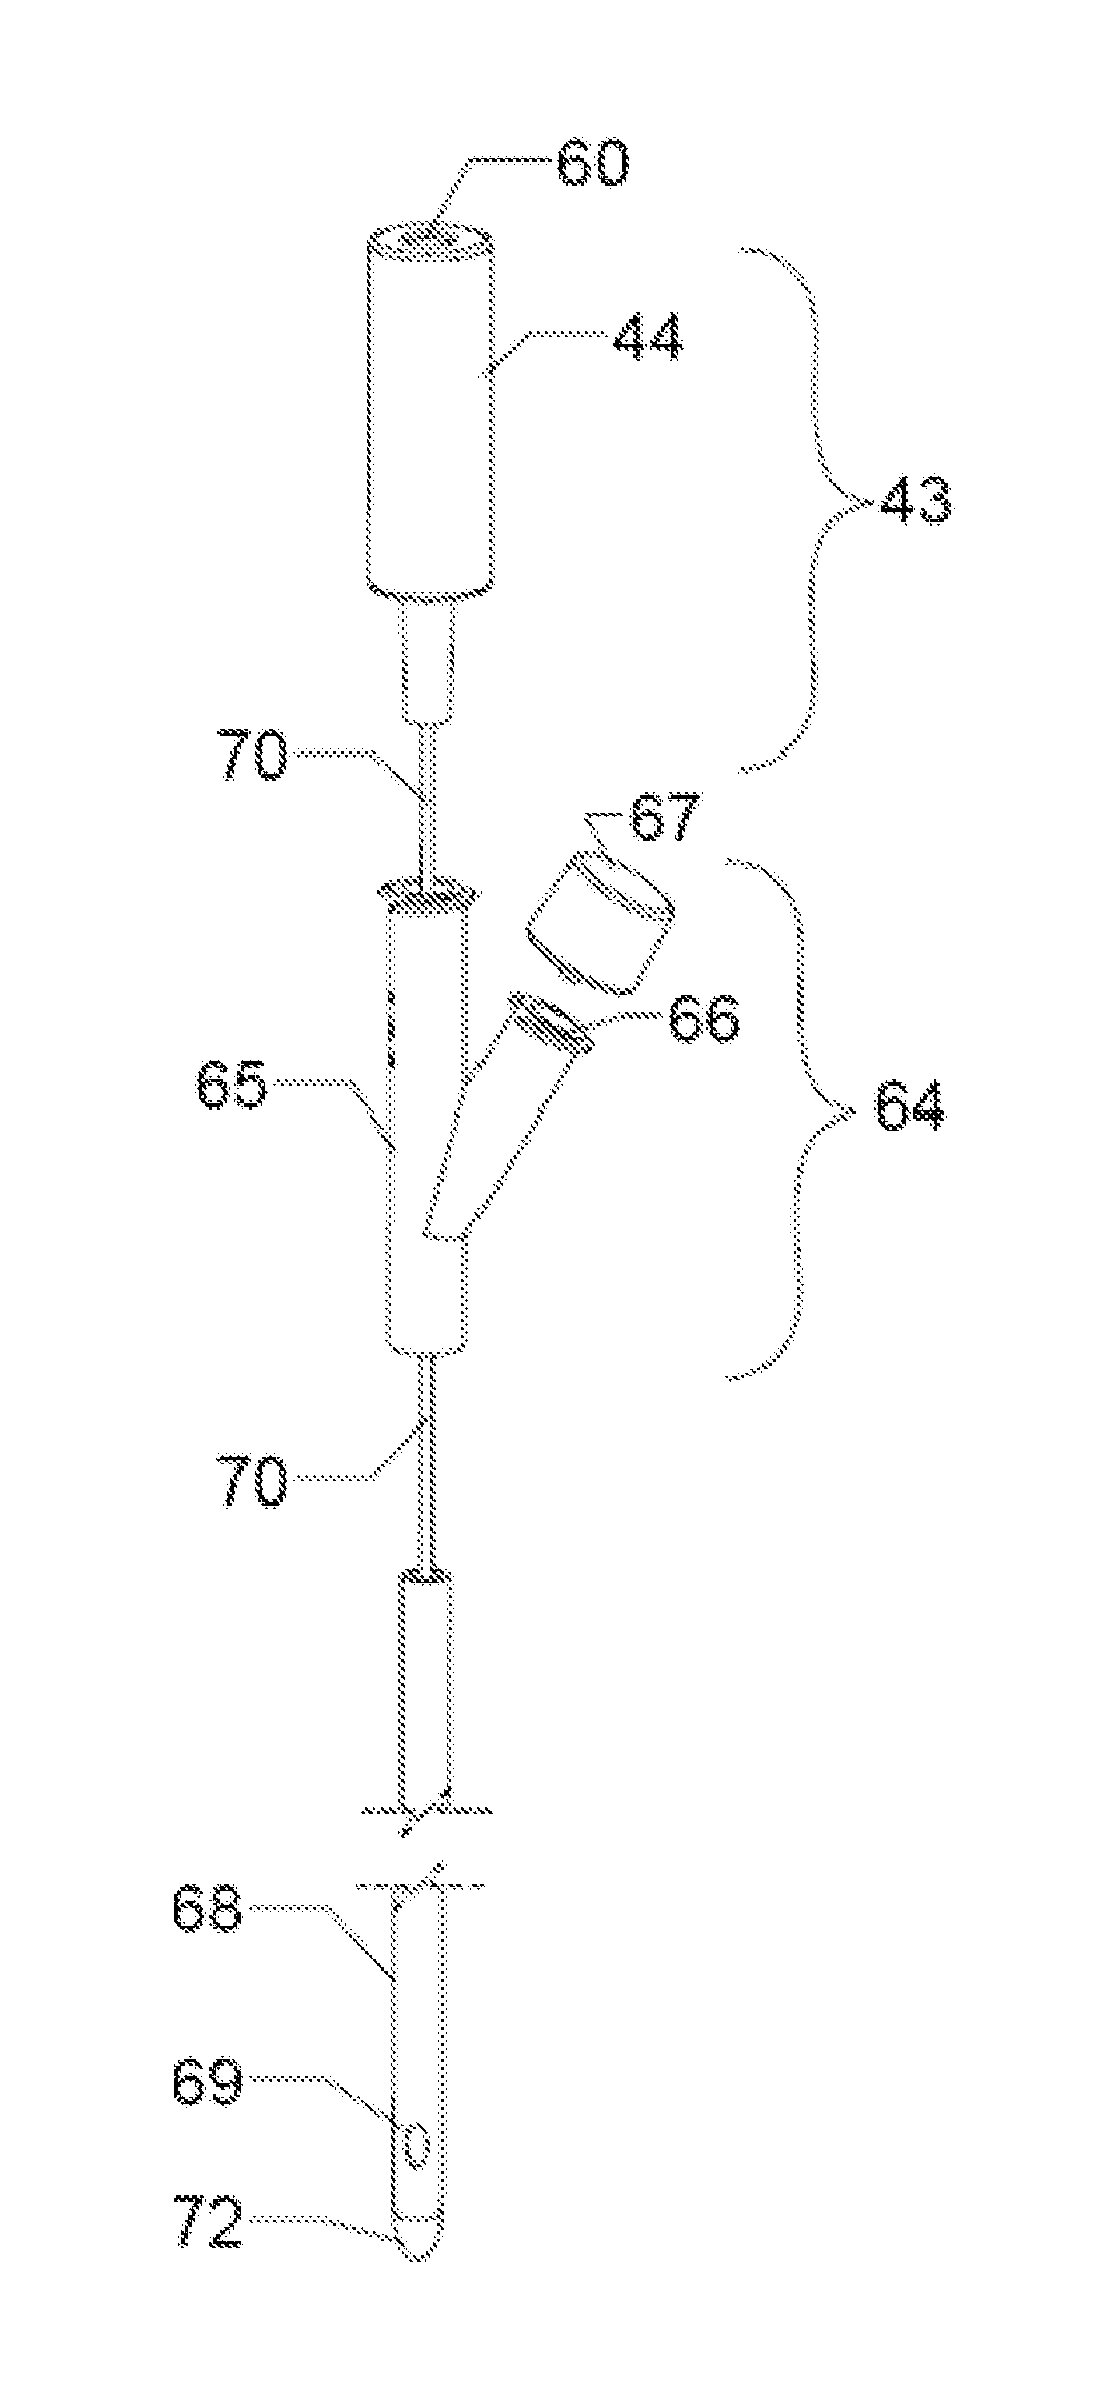 Electrical neuromodulation stimulation system and method for treating urinary incontinence